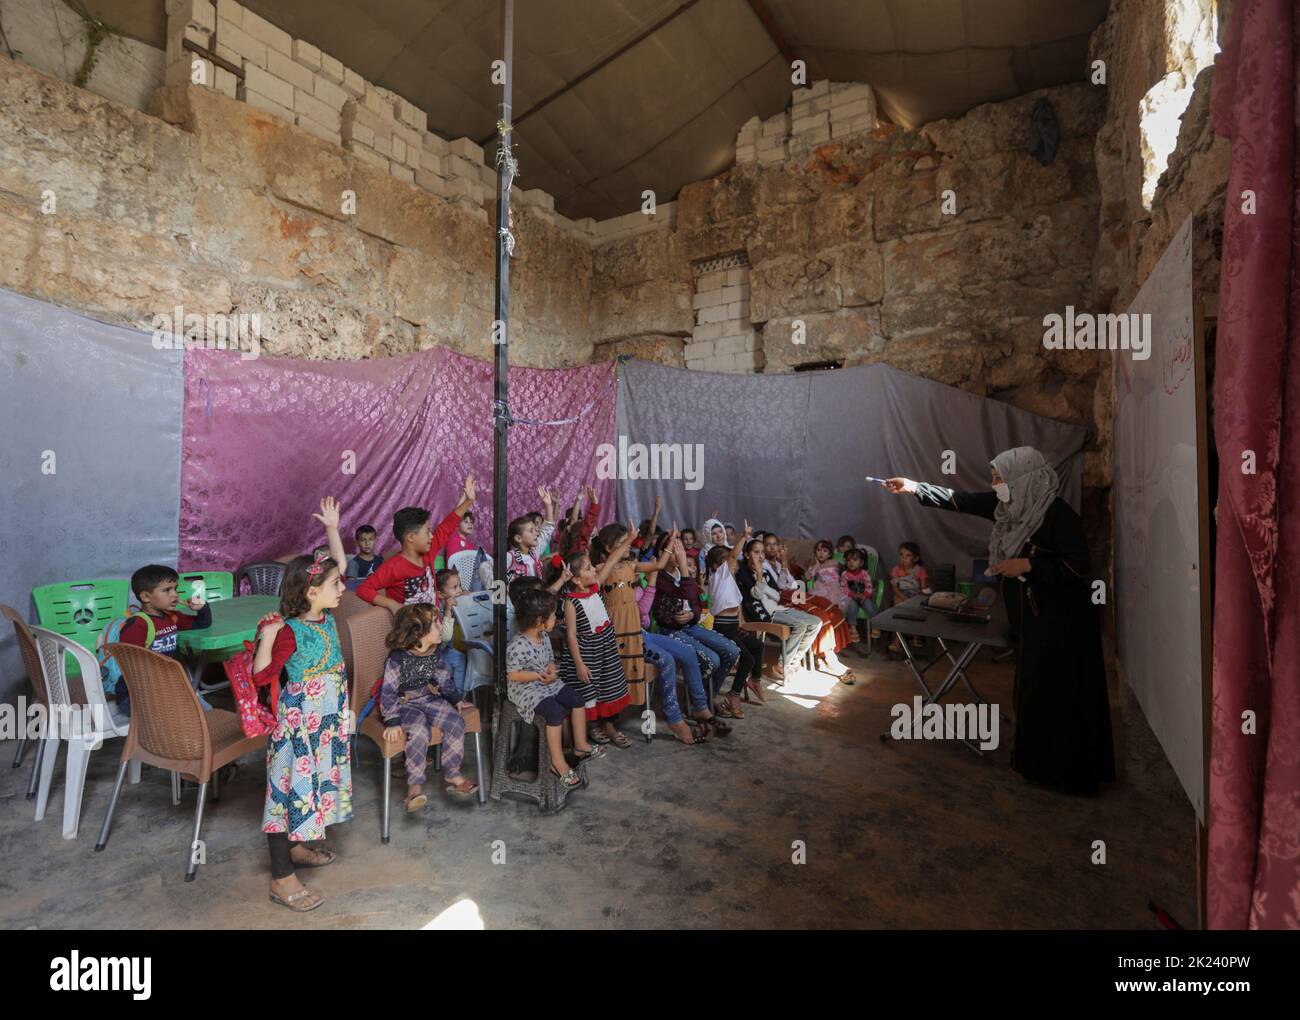 Students attend a class inside a Byzantine castle that was transformed into a makeshift school for the internally displaced children, in the opposition-held Idlib, Syria September 20, 2022. REUTERS/Khalil Ashawi Stock Photo